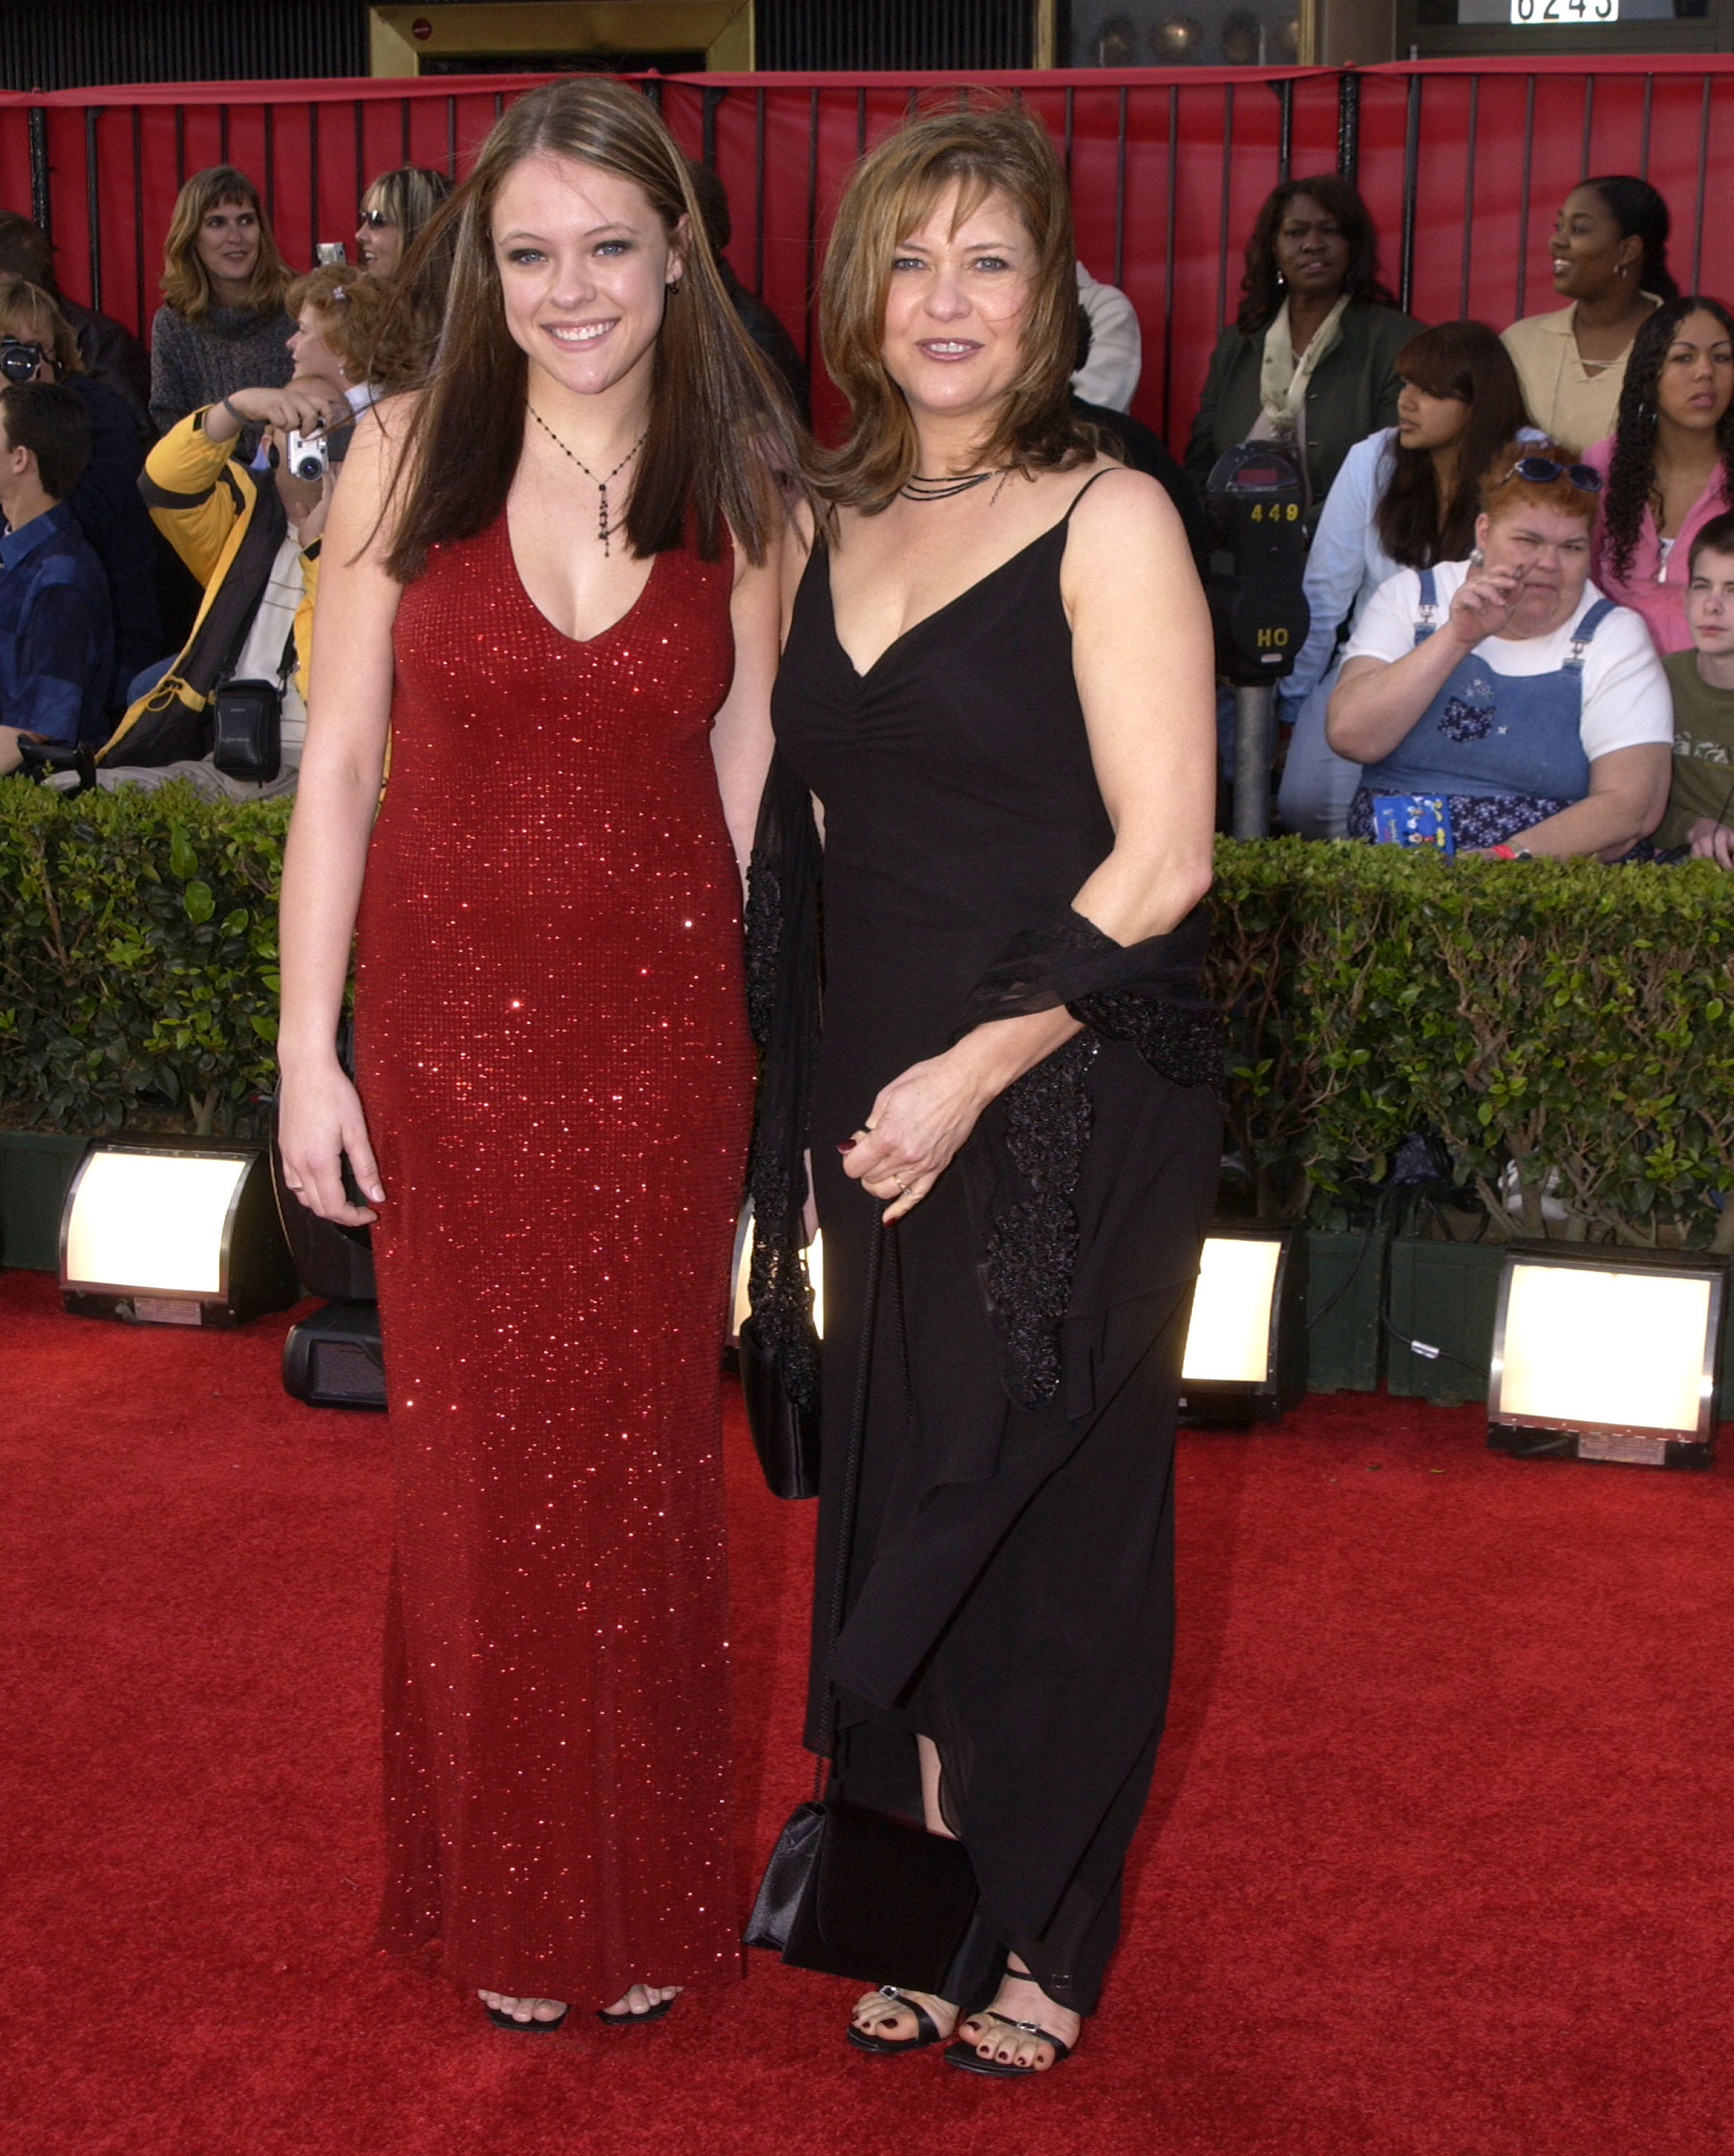 Connie Needham with daughter at the The Pantages Theater on March 16, 2003 in Hollywood, California. | Source: Getty Images